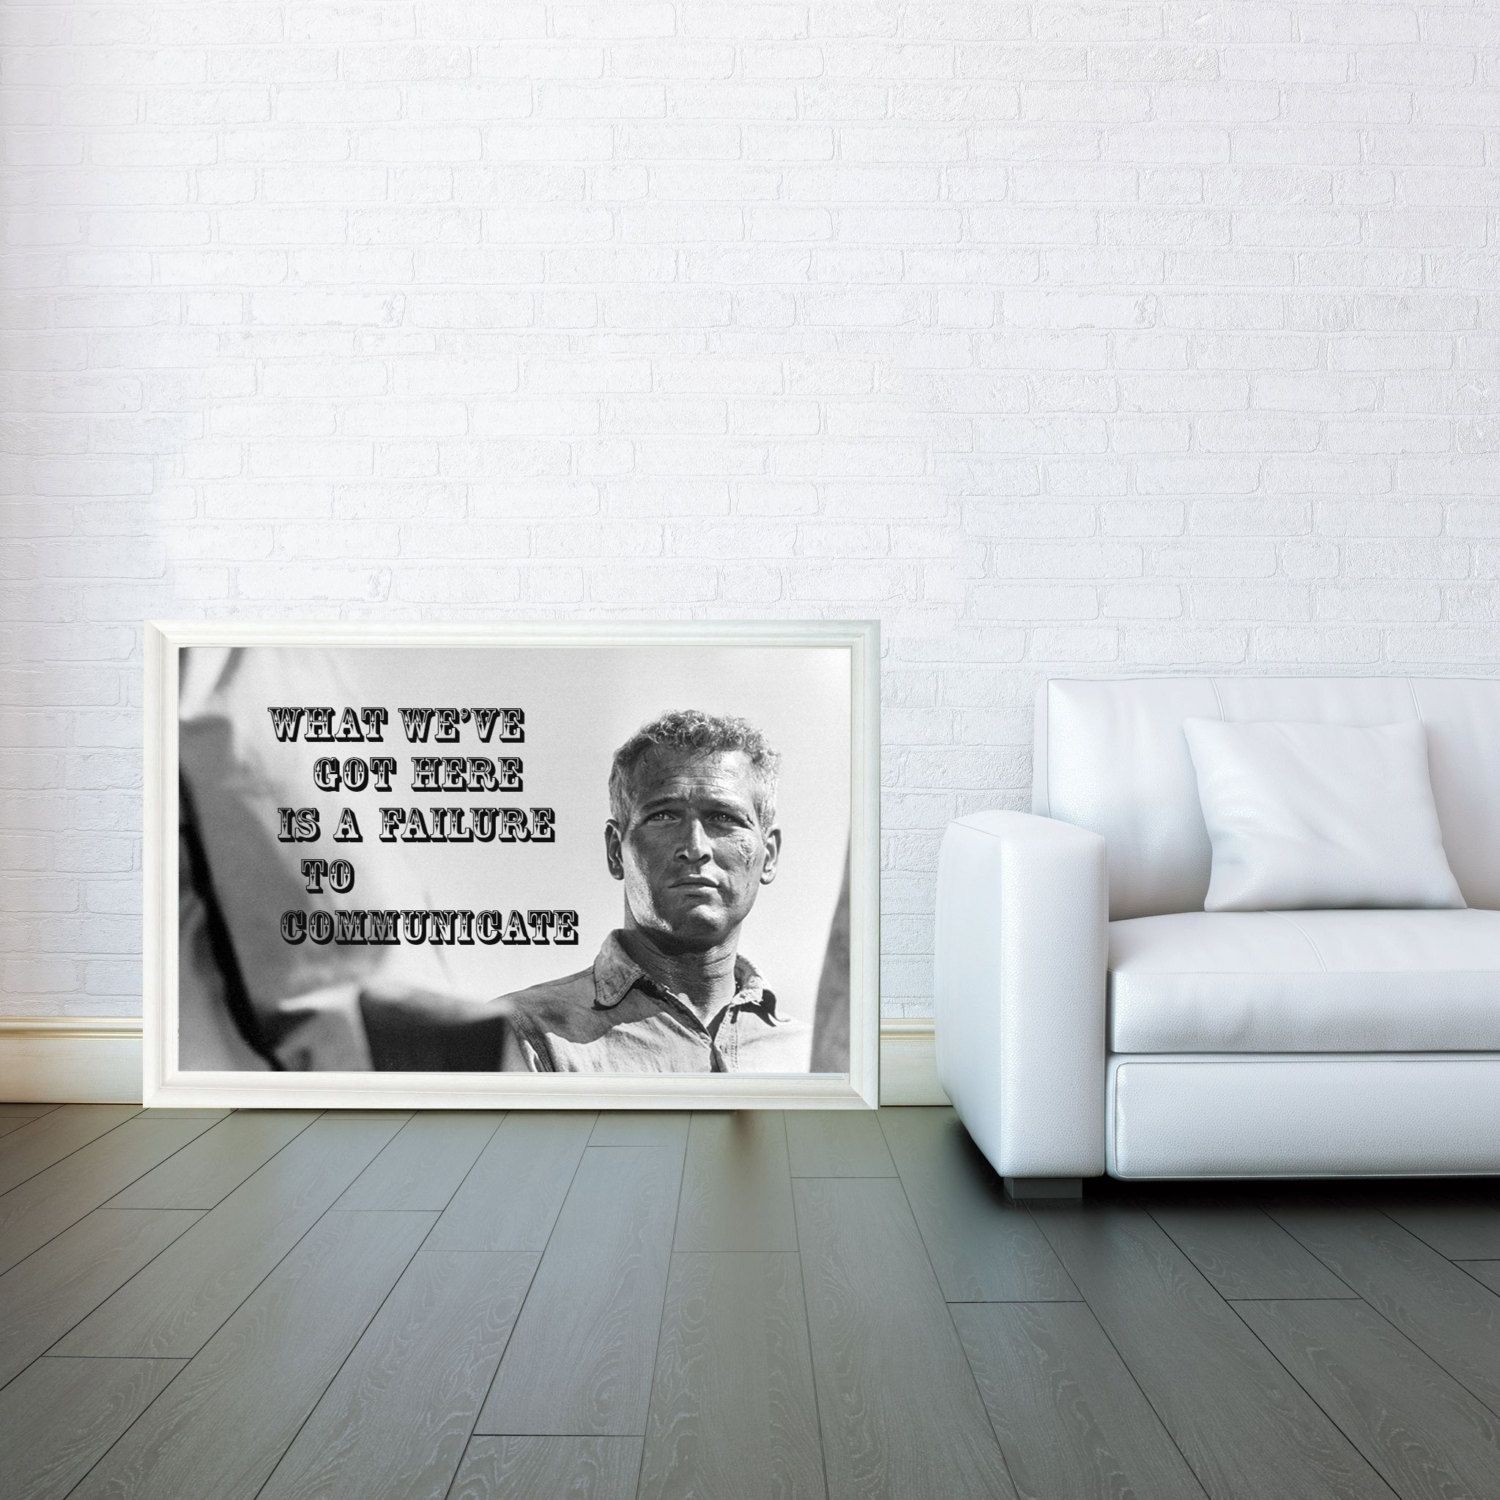 Cool Hand Luke Paul Newman Prints & Posters Wall Art Print Gifts For Inside Wall Art For Men (View 15 of 20)